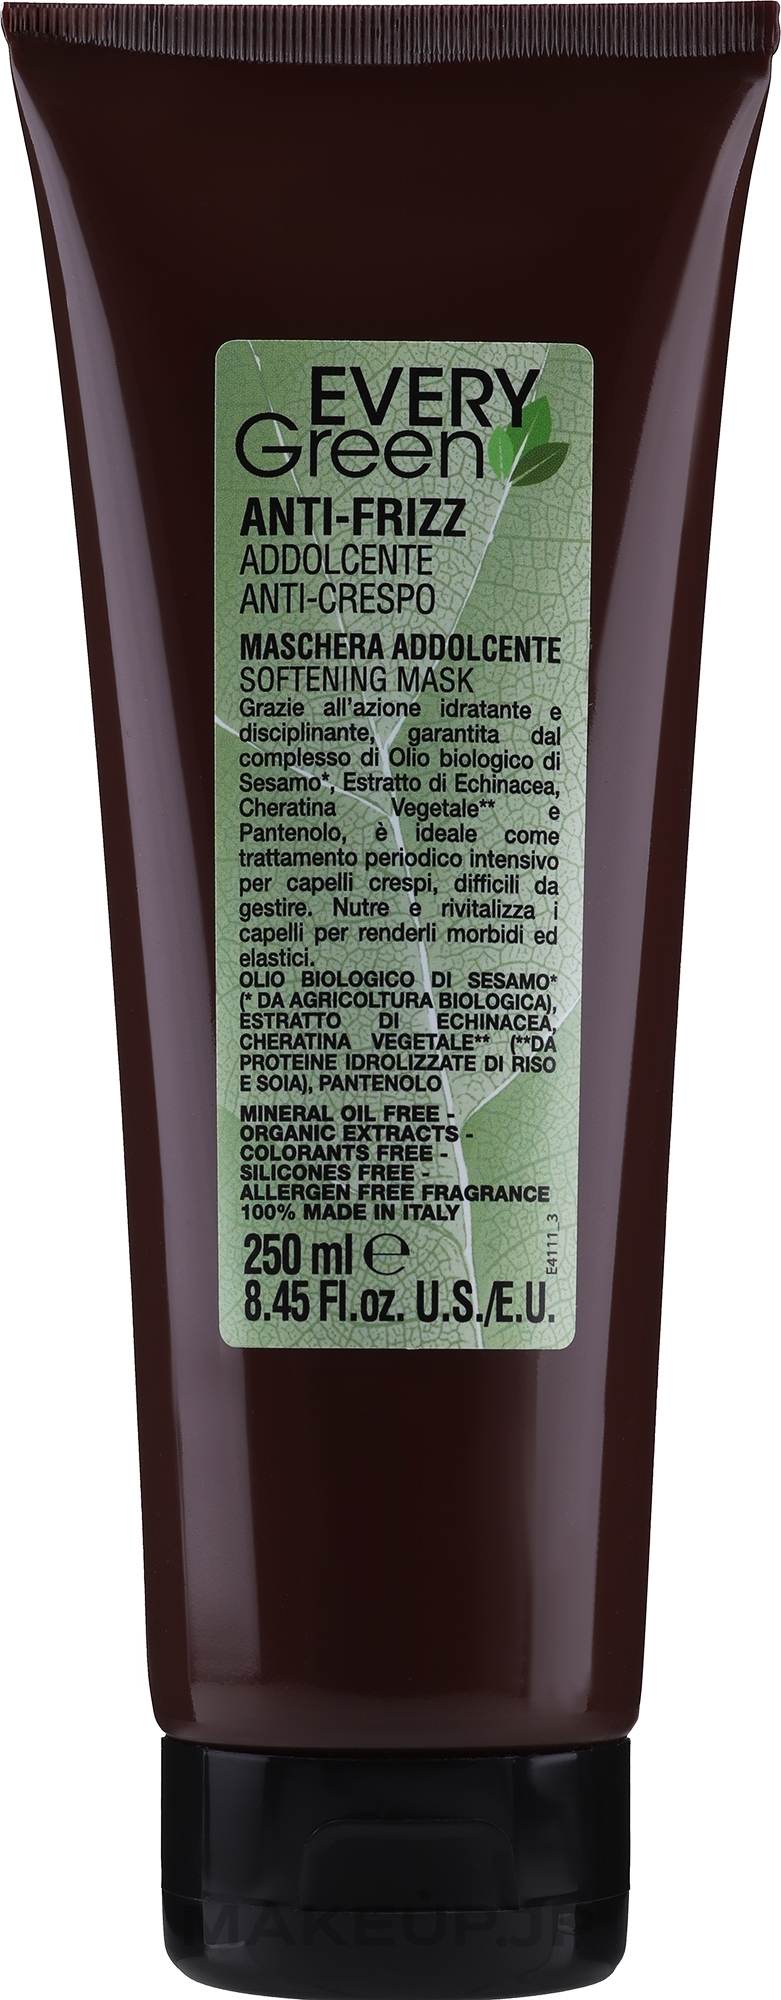 Moisturising Mask for Dry and Frizzy Hair - EveryGreen Anti-Frizz Mask — photo 250 ml